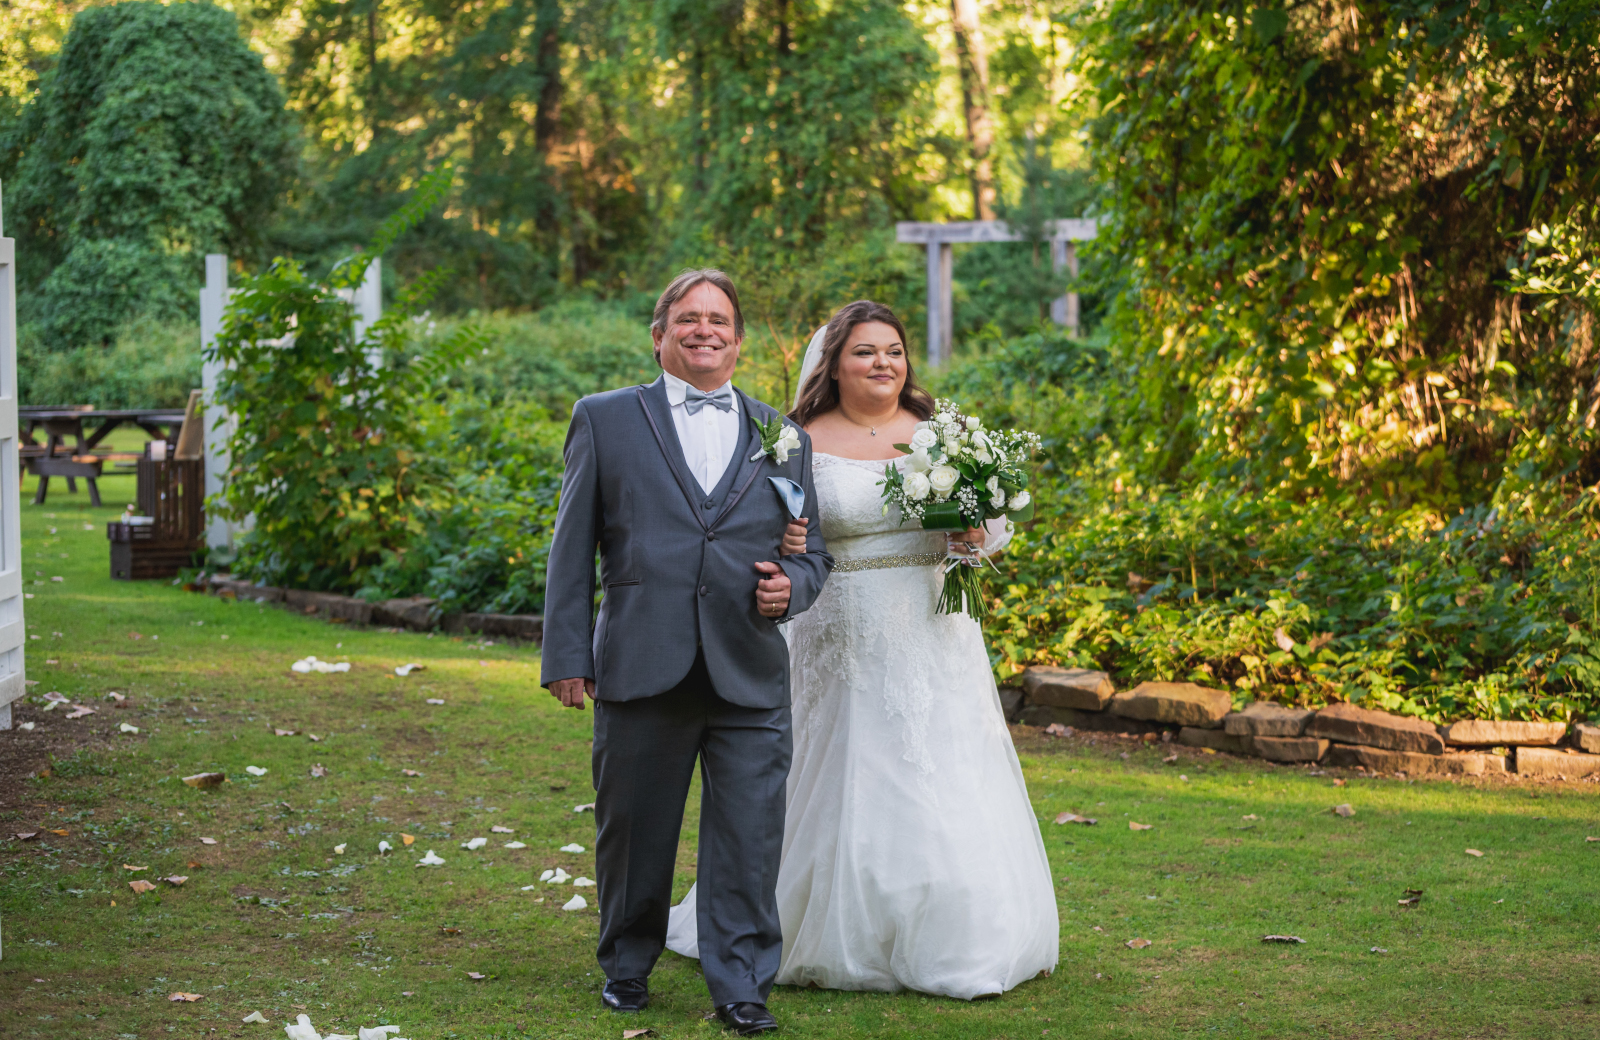 Bride with dad, father of the bride, bridal march, bridal processional, green, nature, outdoor September wedding ceremony at Westfall Event Center